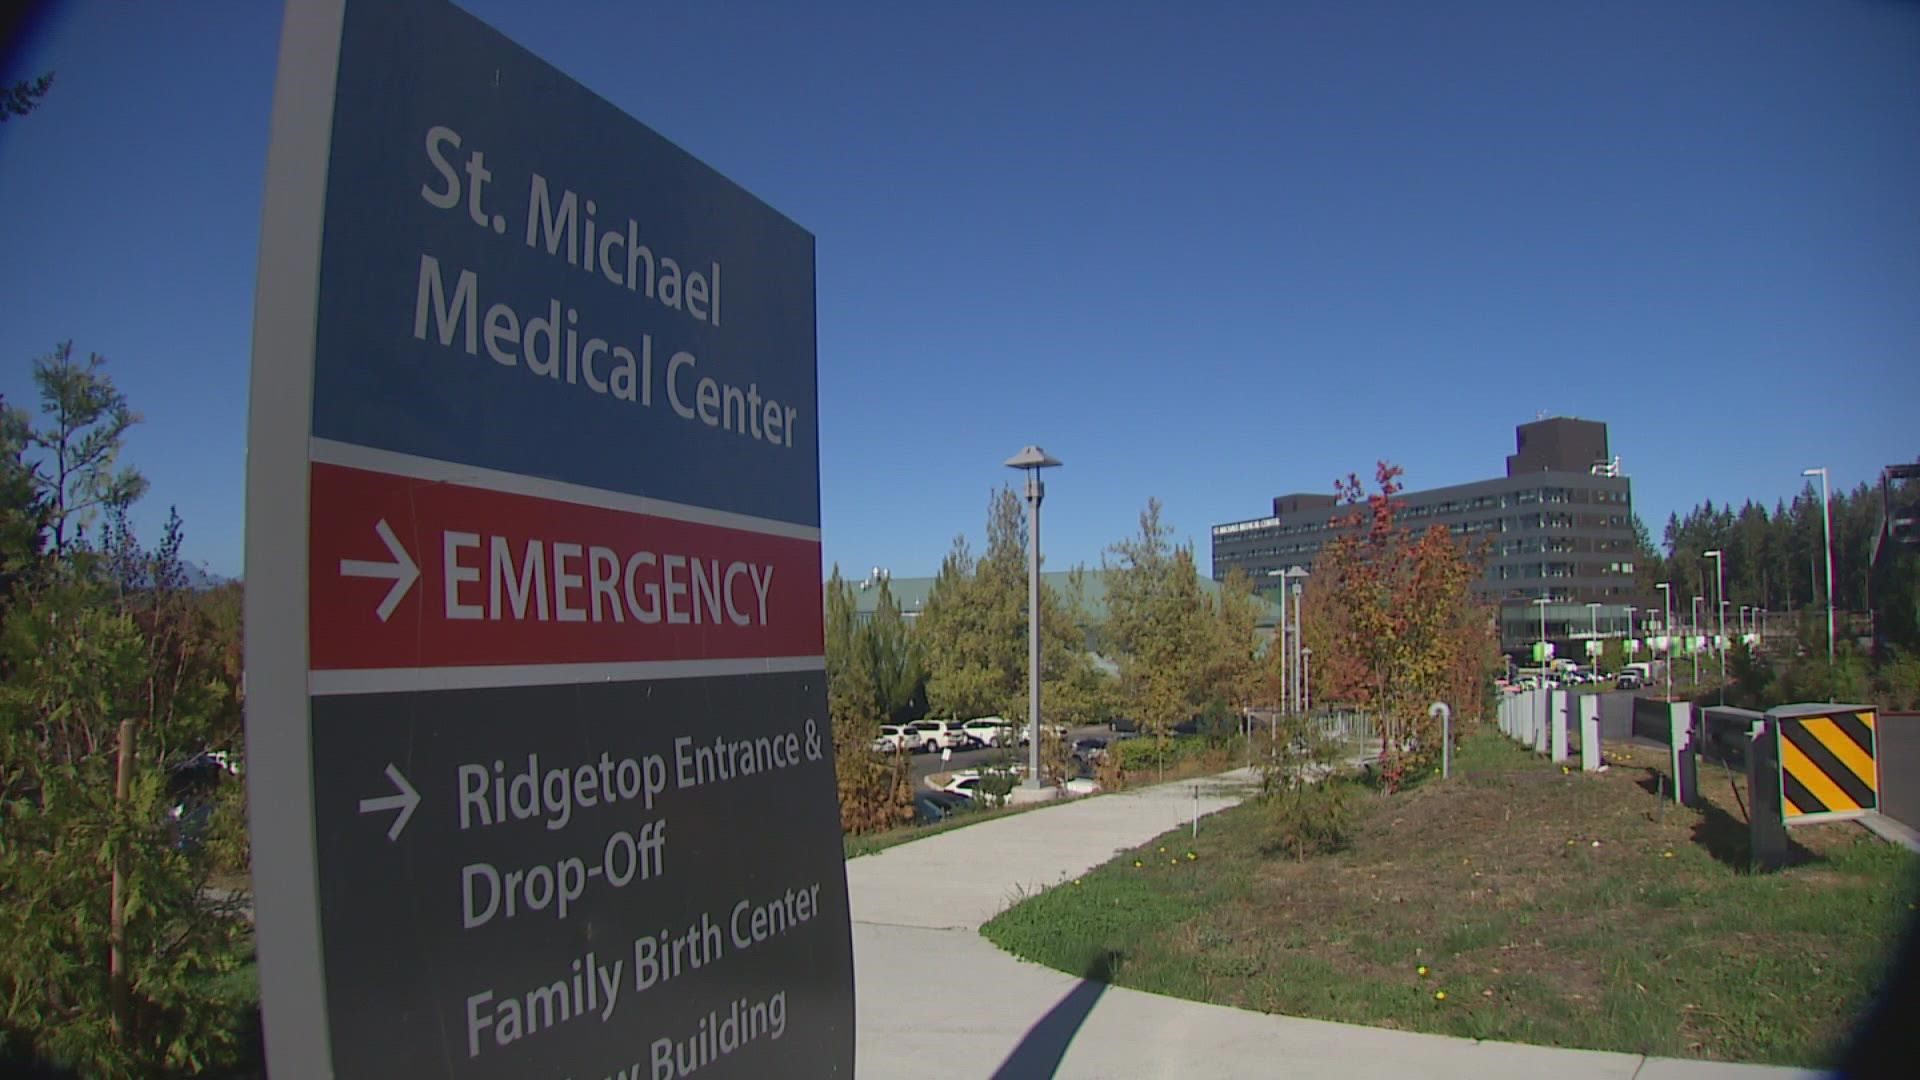 A nurse in the ER department in the St. Michael Medical Center made the 911 call because her staff was “drowning,” and needed help fast.